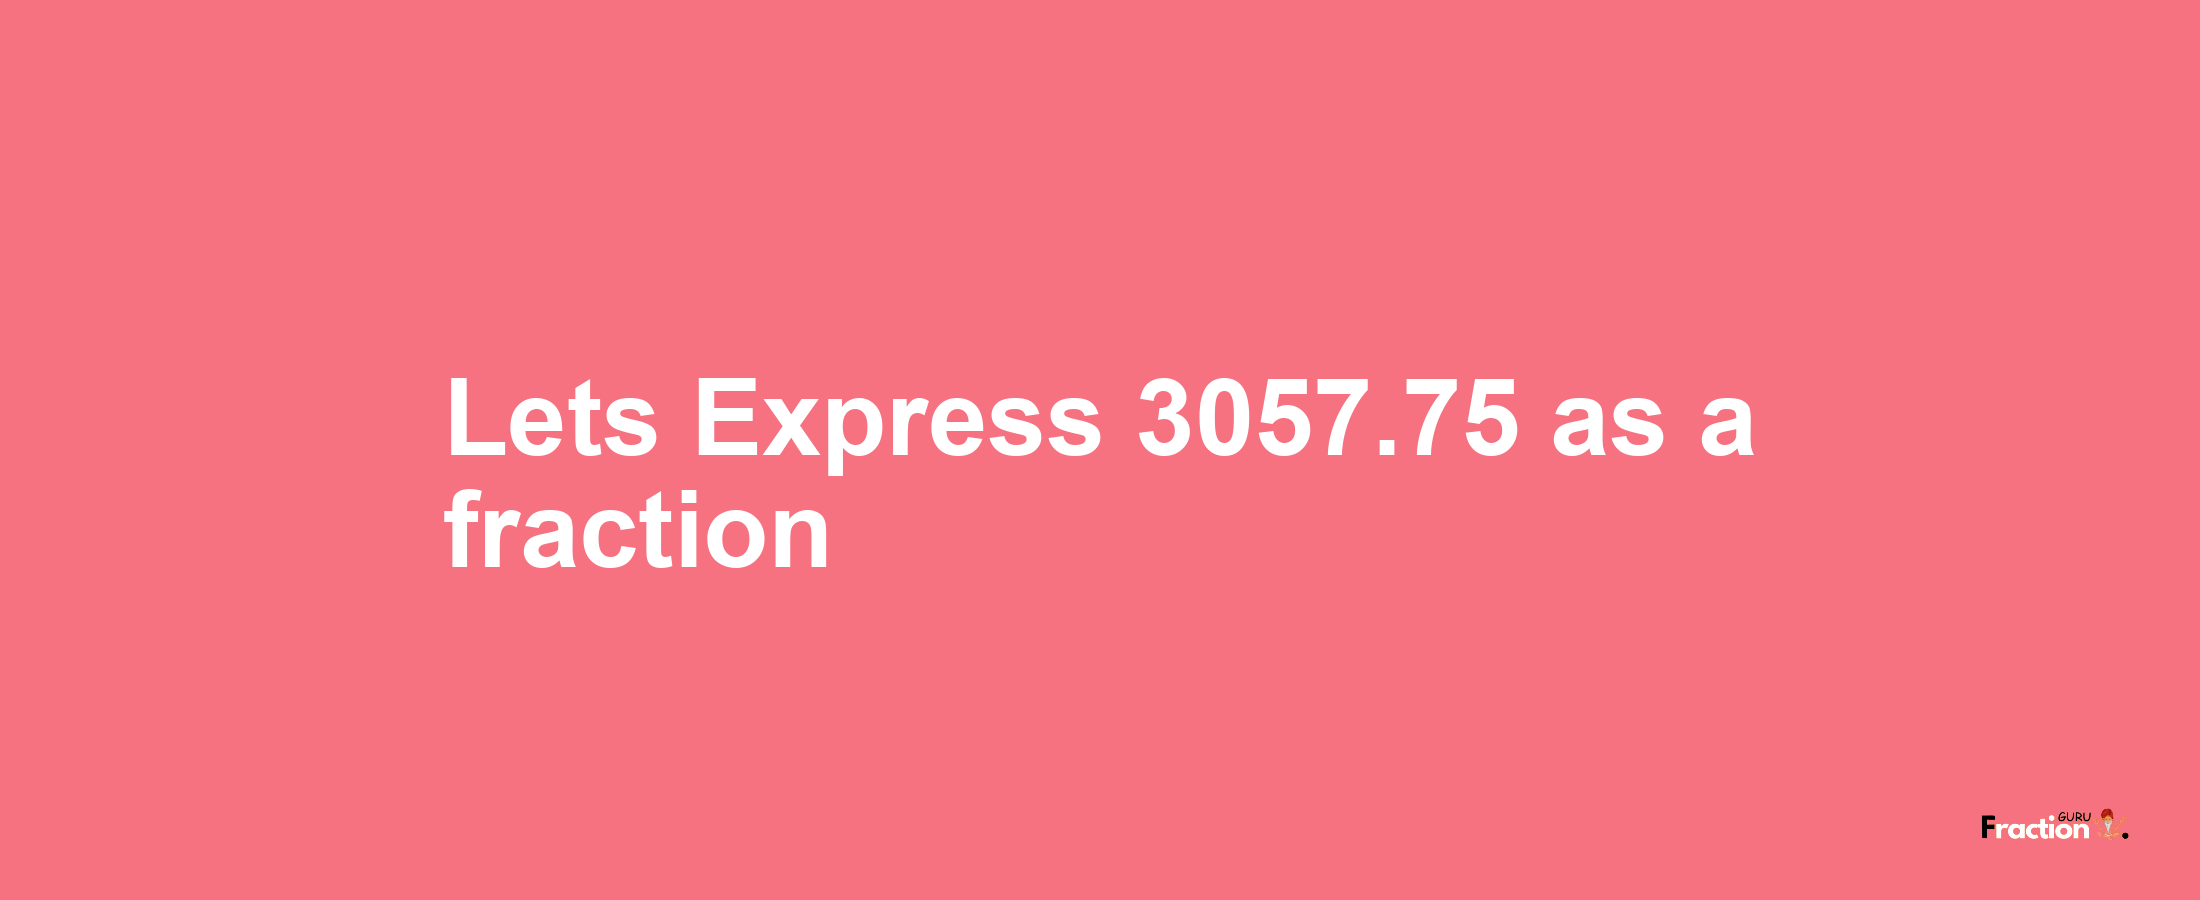 Lets Express 3057.75 as afraction